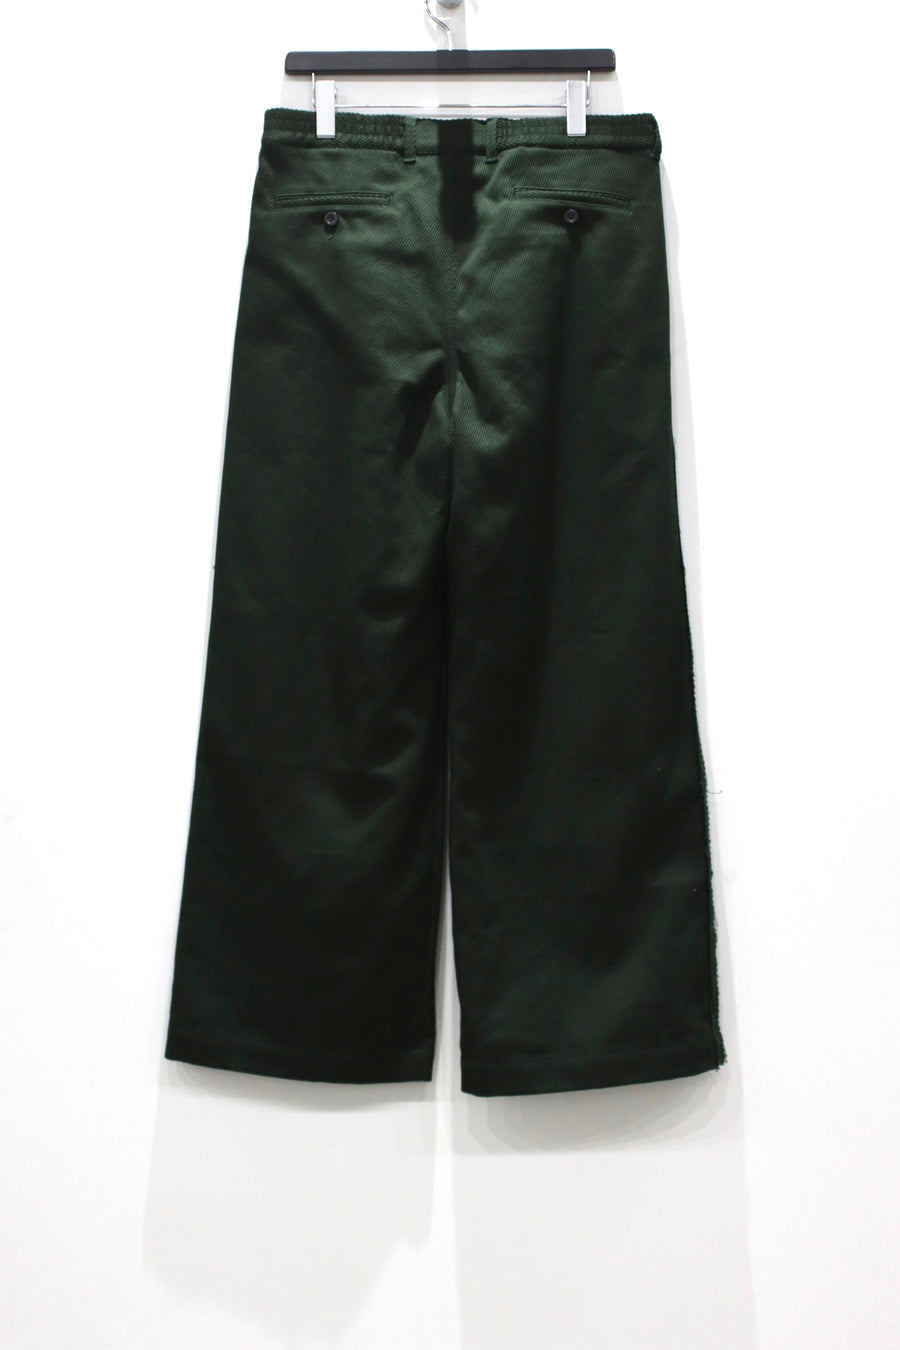 Children of the discordance   SELVAGE TROUSERS